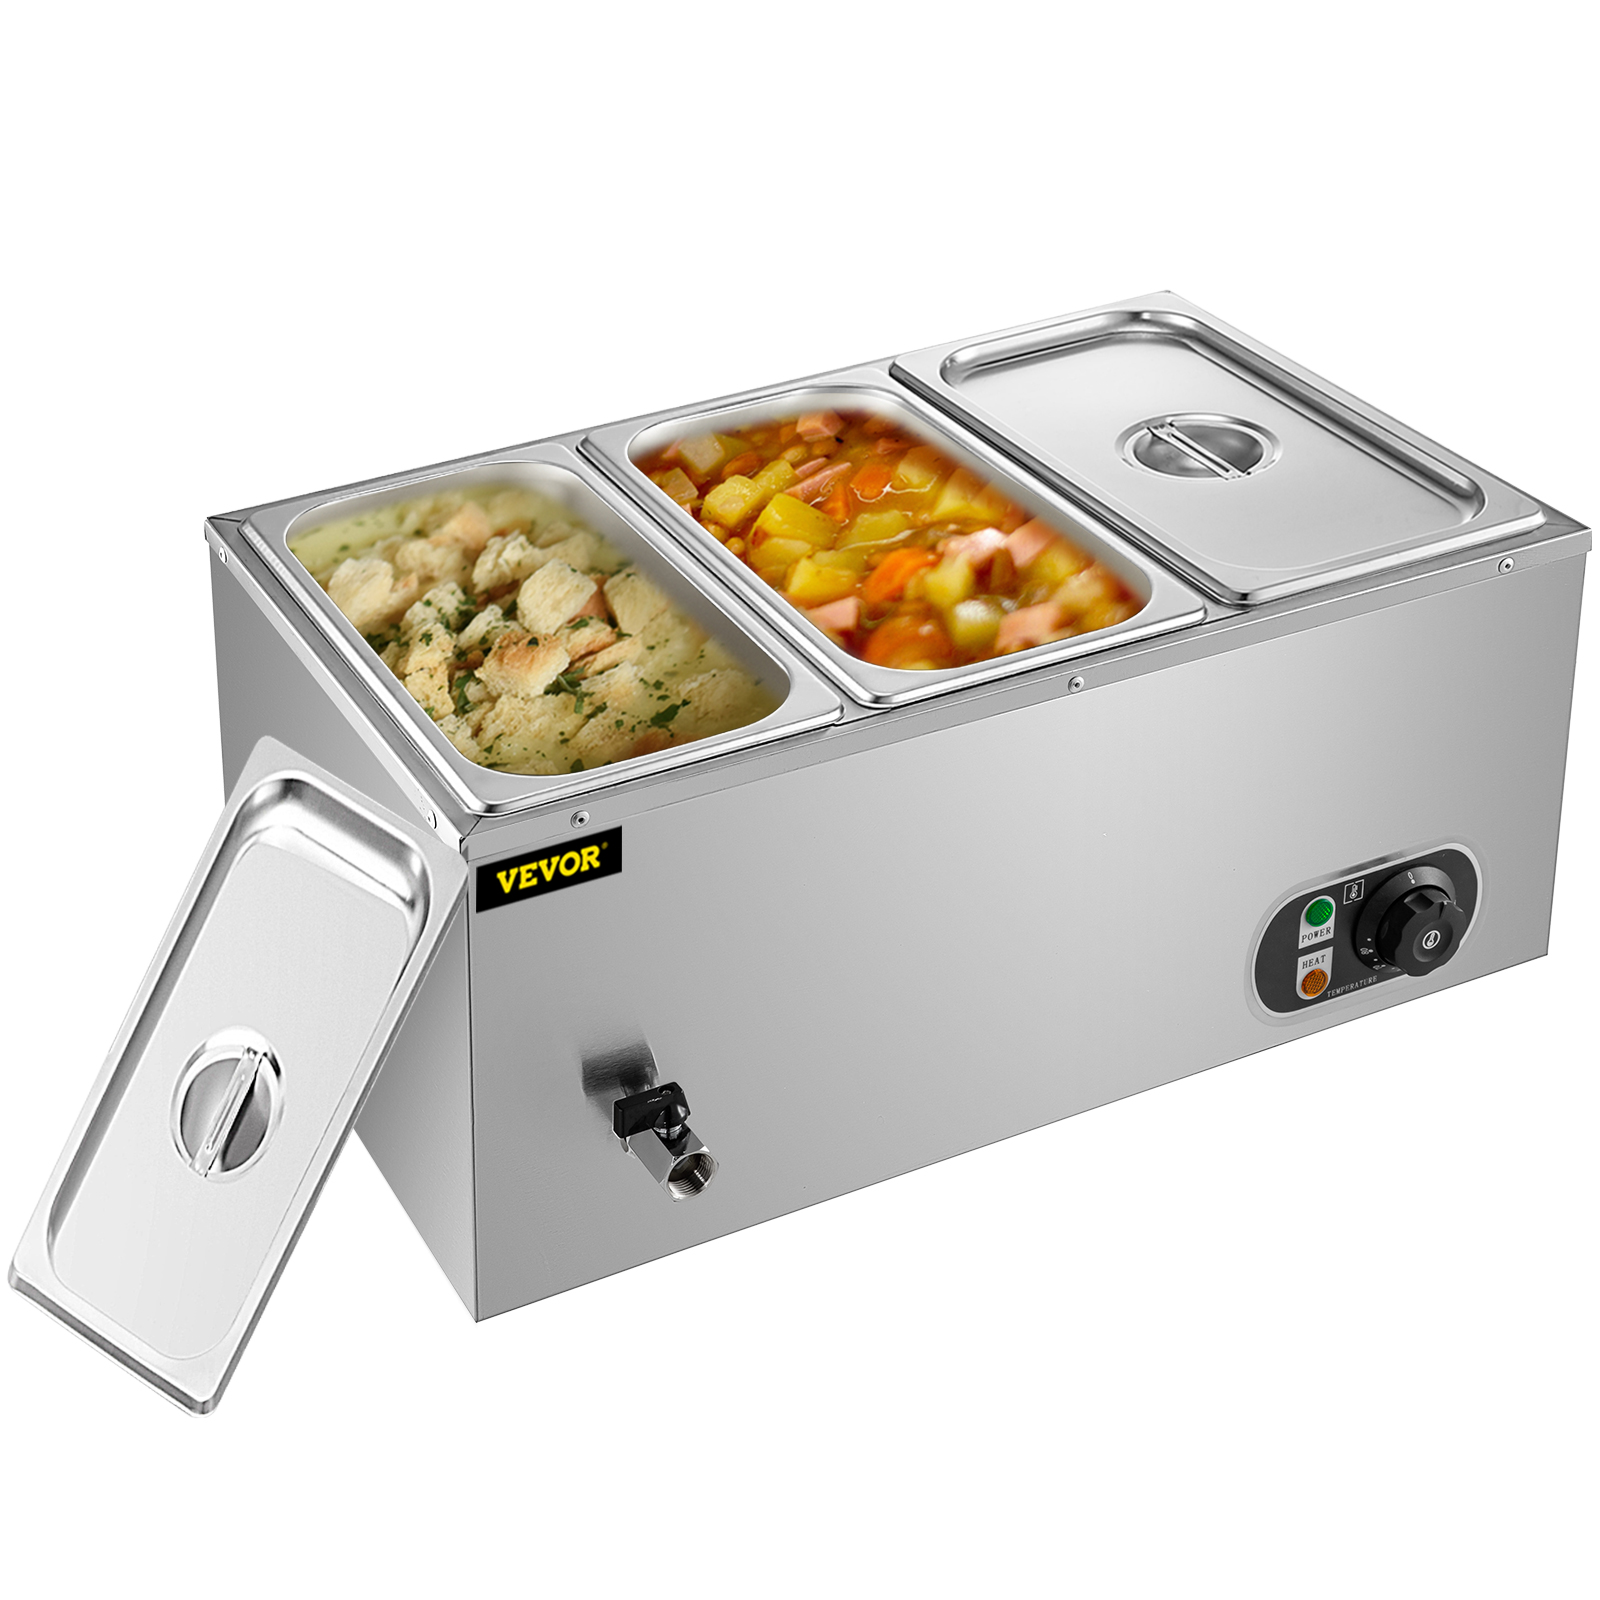 VEVOR VEVOR Commercial Food Warmer 3-Pan 850W Electric Countertop Steam  Table 15cm/6inch Deep Stainless Steel Bain Marie Buffet Food Warmer Large  Capacity Quart/Pan for Catering and Restaurants VEVOR EU